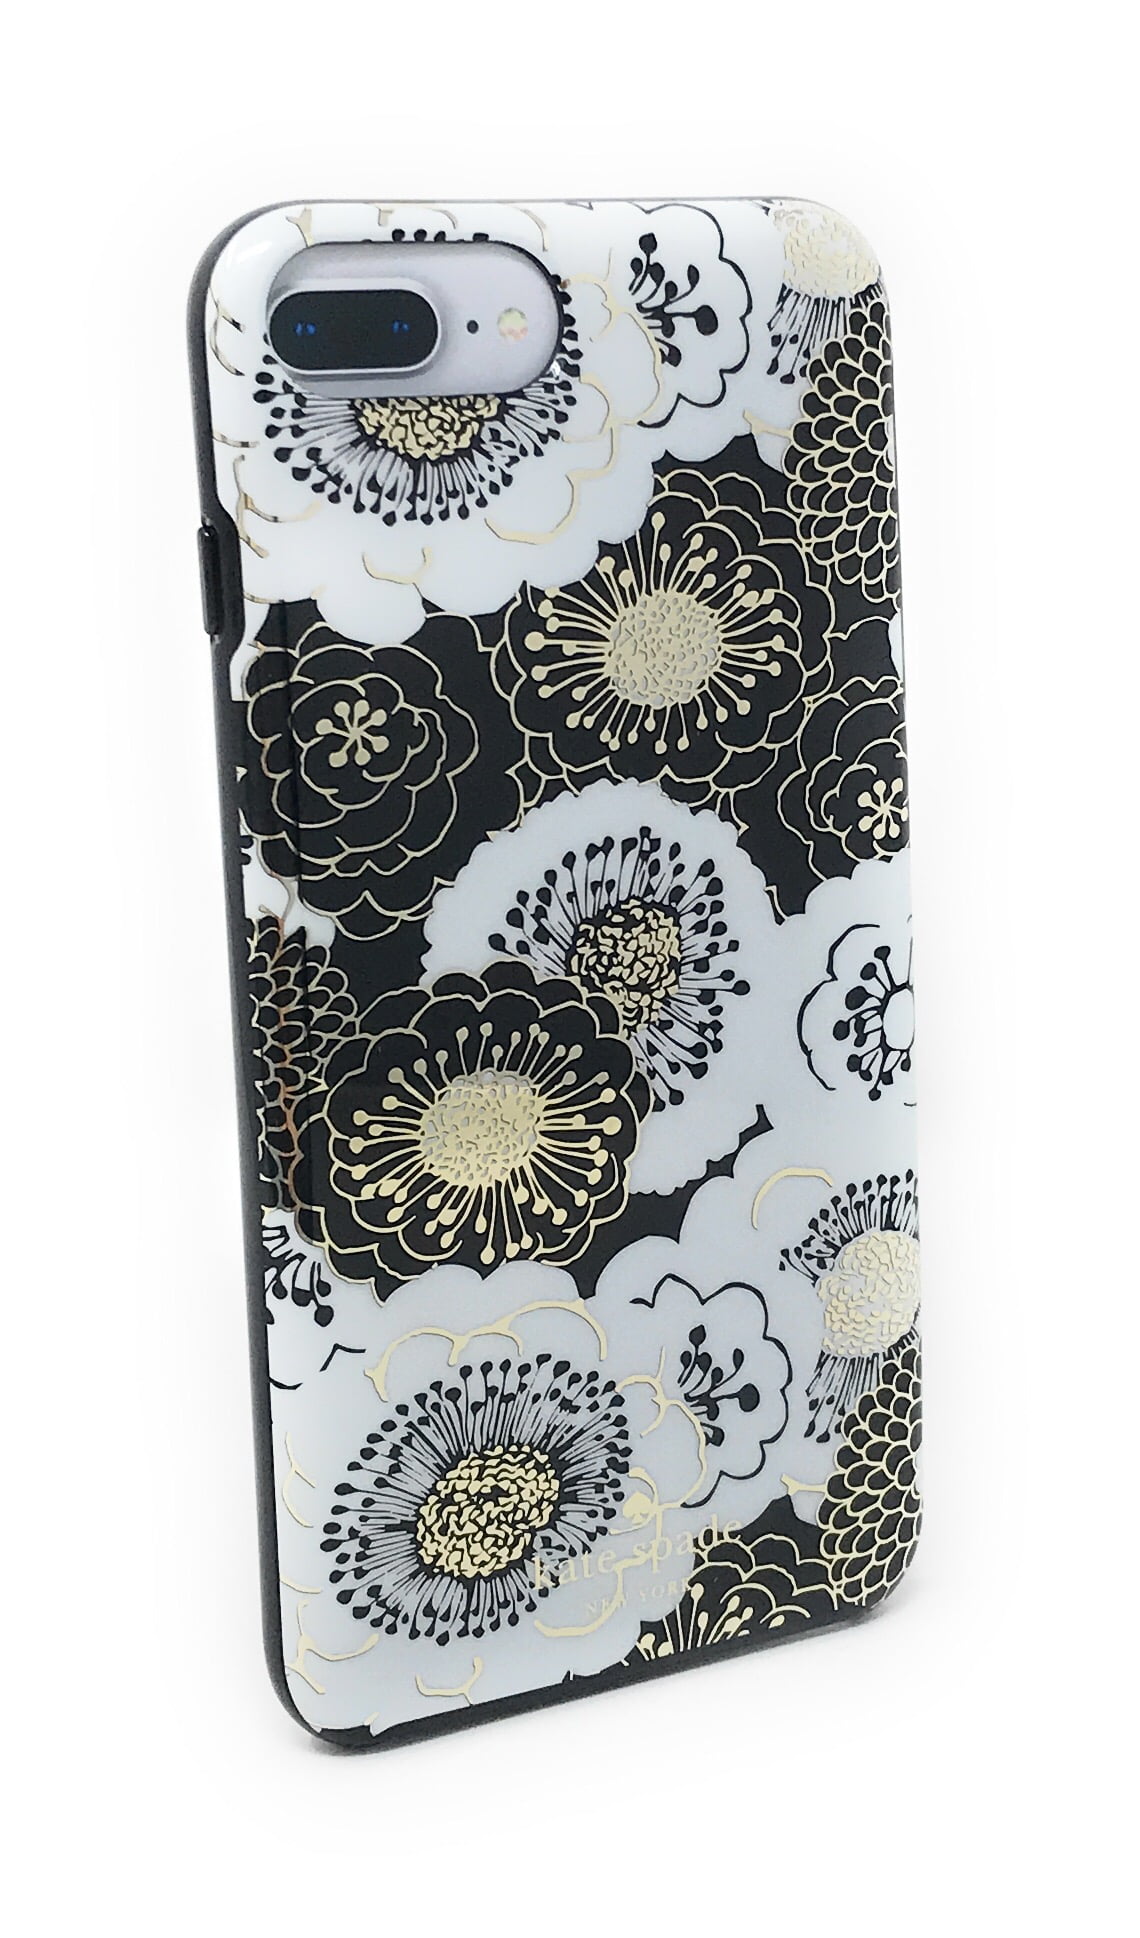 Kate Spade New York Floral Case for iPhone 8 Plus / iPhone 7 Plus / iPhone  6 Plus - Black/Gold/White 